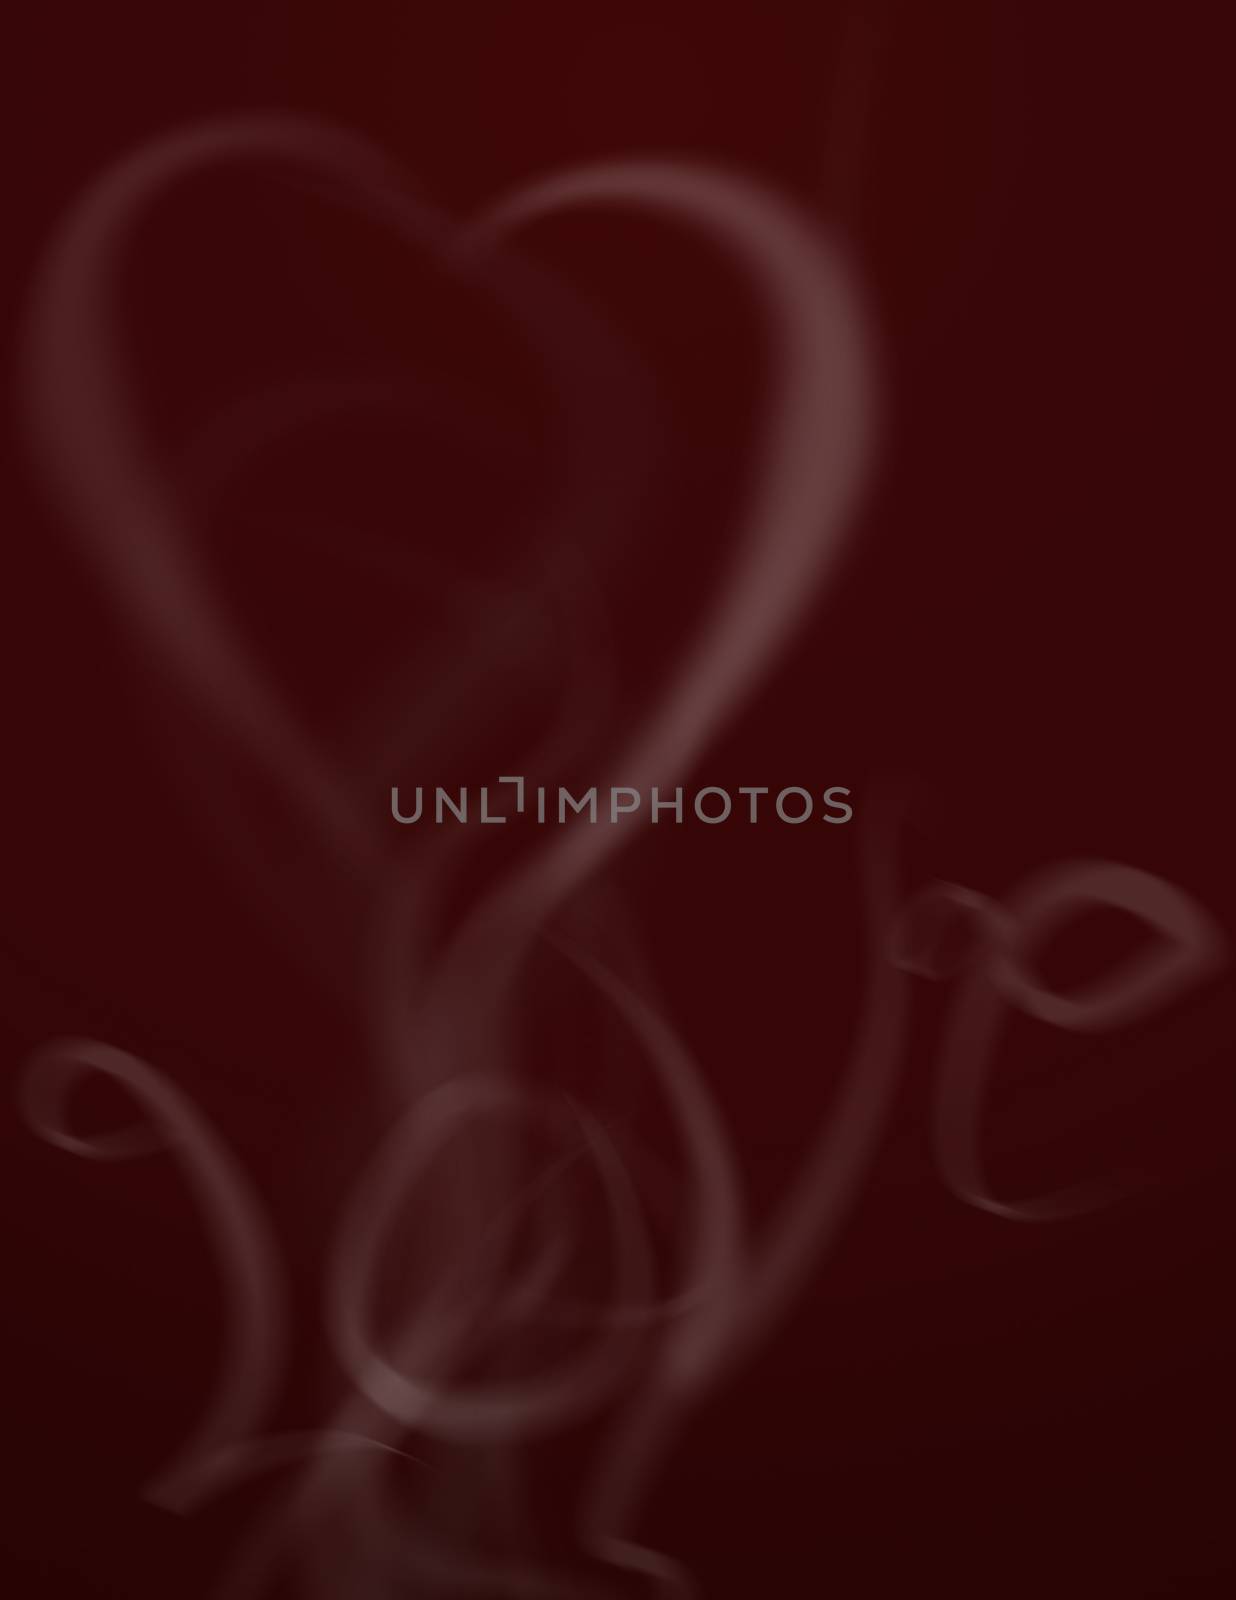 Abstract background. Love sign. Artwork for creative graphic design